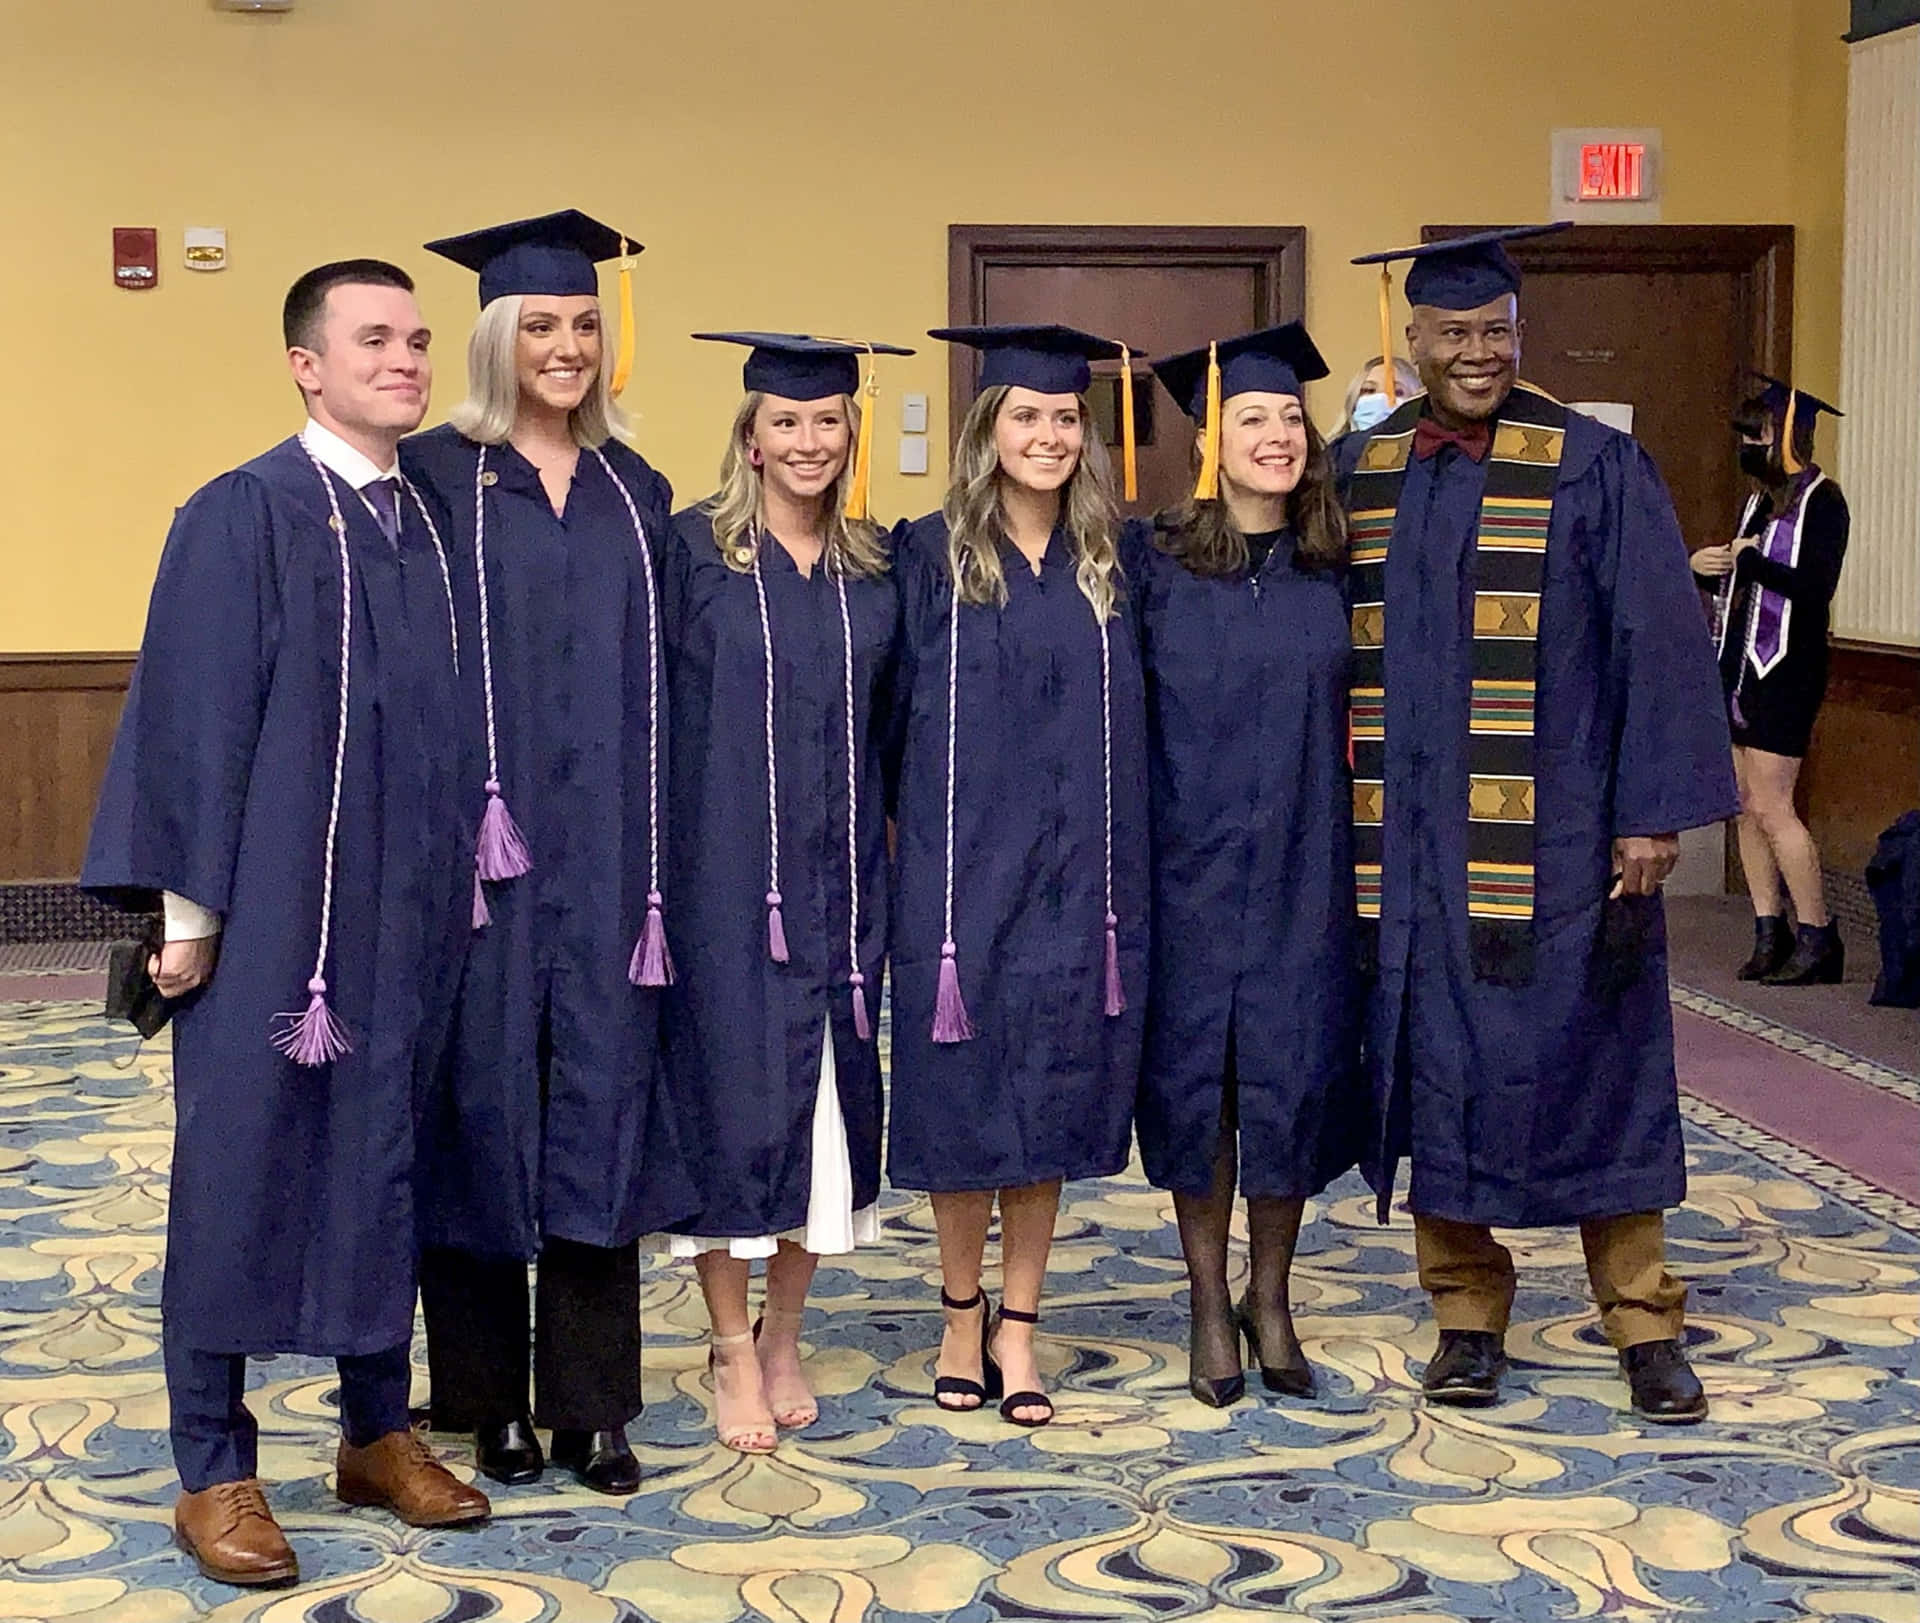 A Group Of People In Graduation Gowns Posing For A Photo